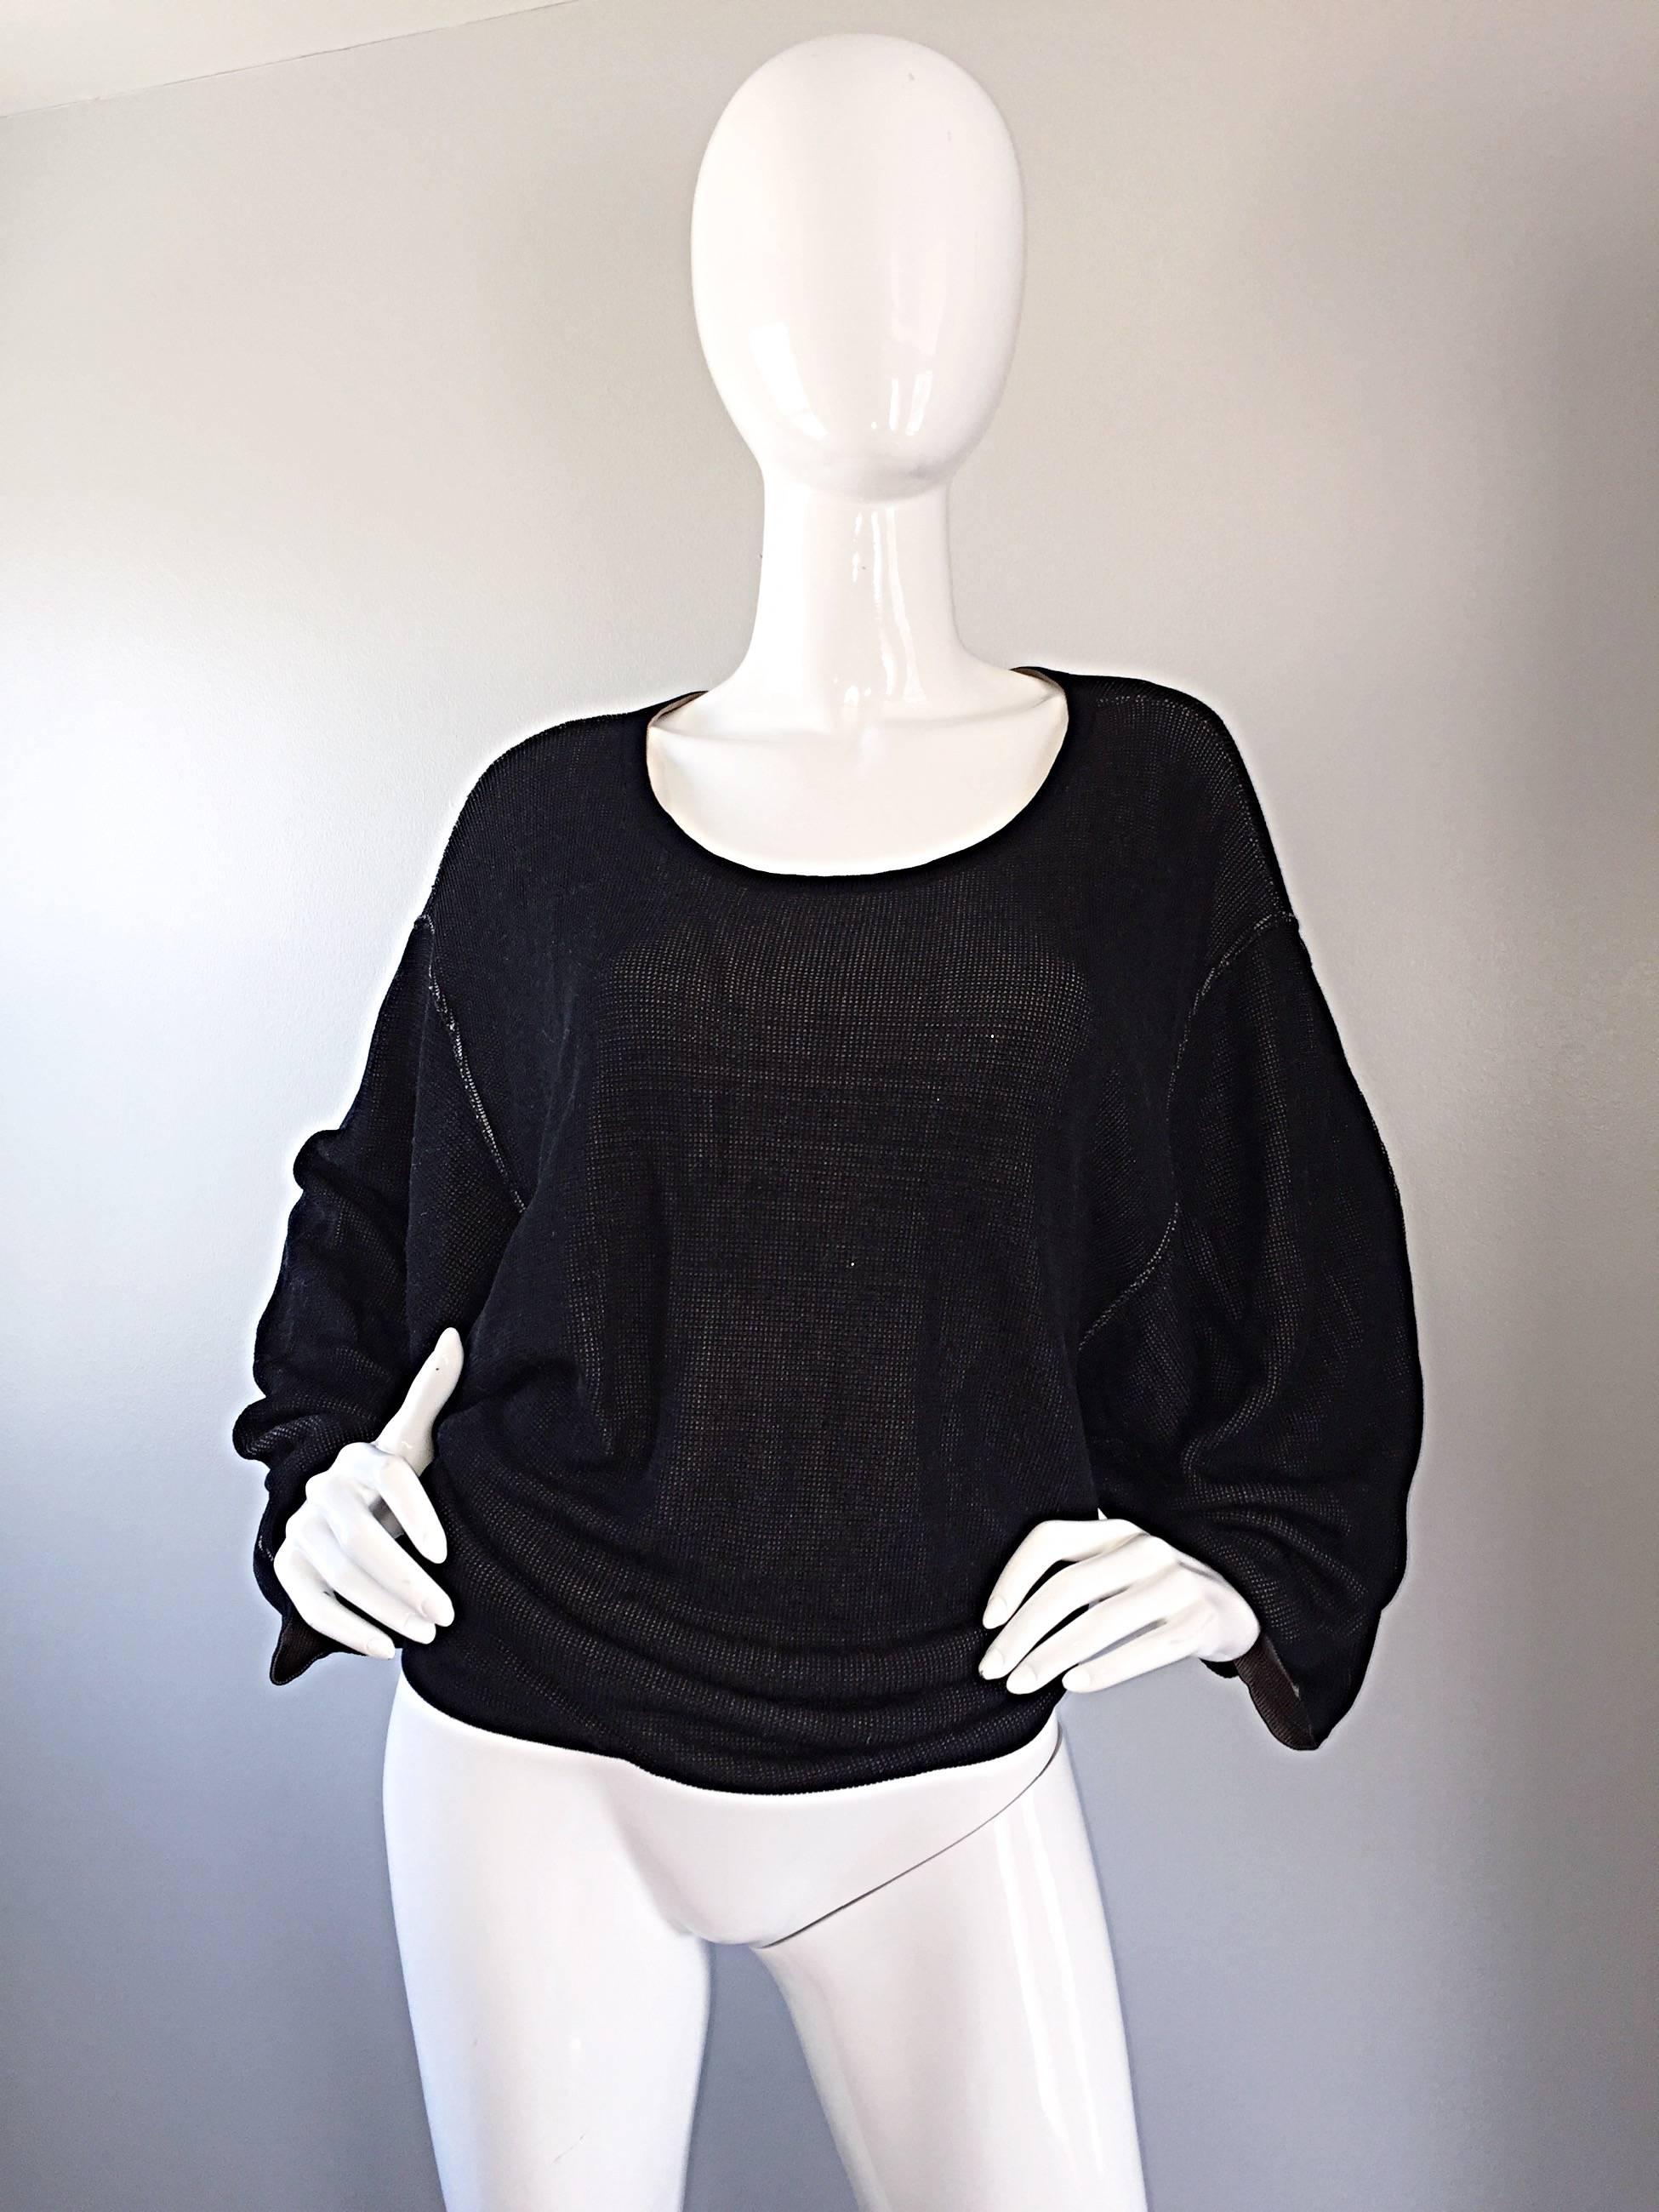 1980s Azzedine Alaia Black Dolman Sleeve Vintage 80s Mini Dress or Sweater In Excellent Condition For Sale In San Diego, CA